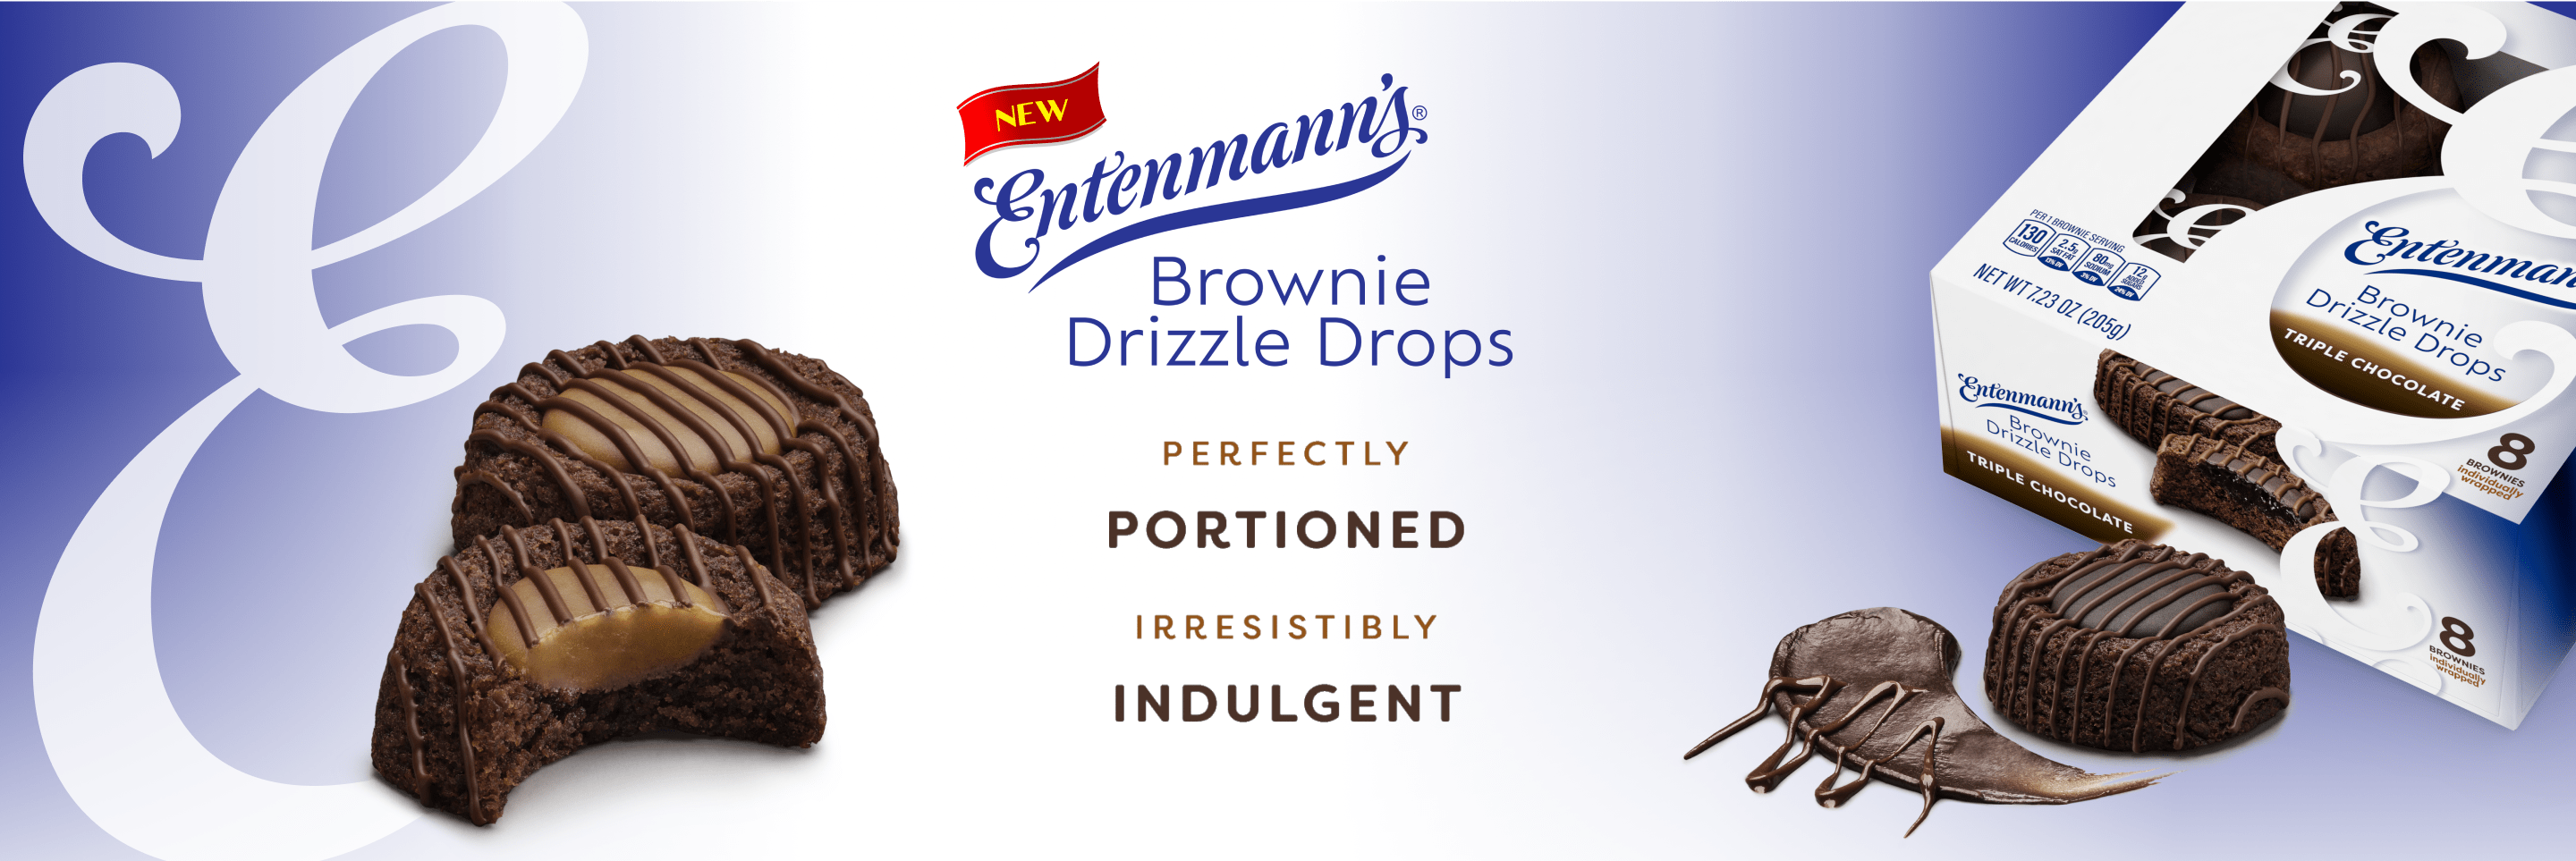 New Entenmann's Brownie Drizzle Drops. Perfectly Portioned Irresistibly Indulgent.